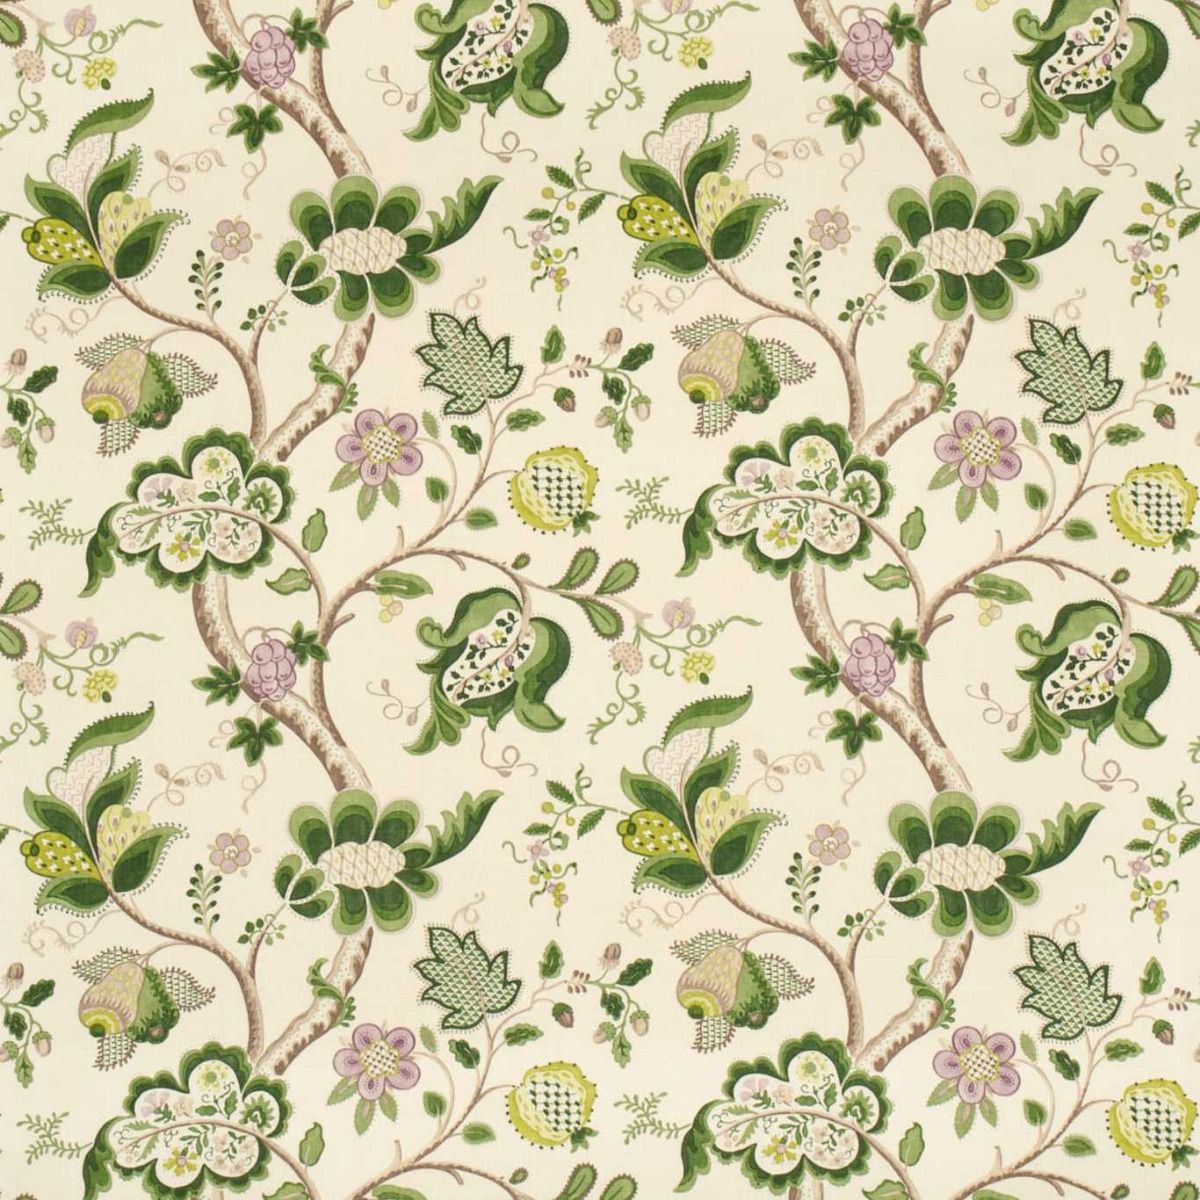 A history of shopping for wallpaper · V&A